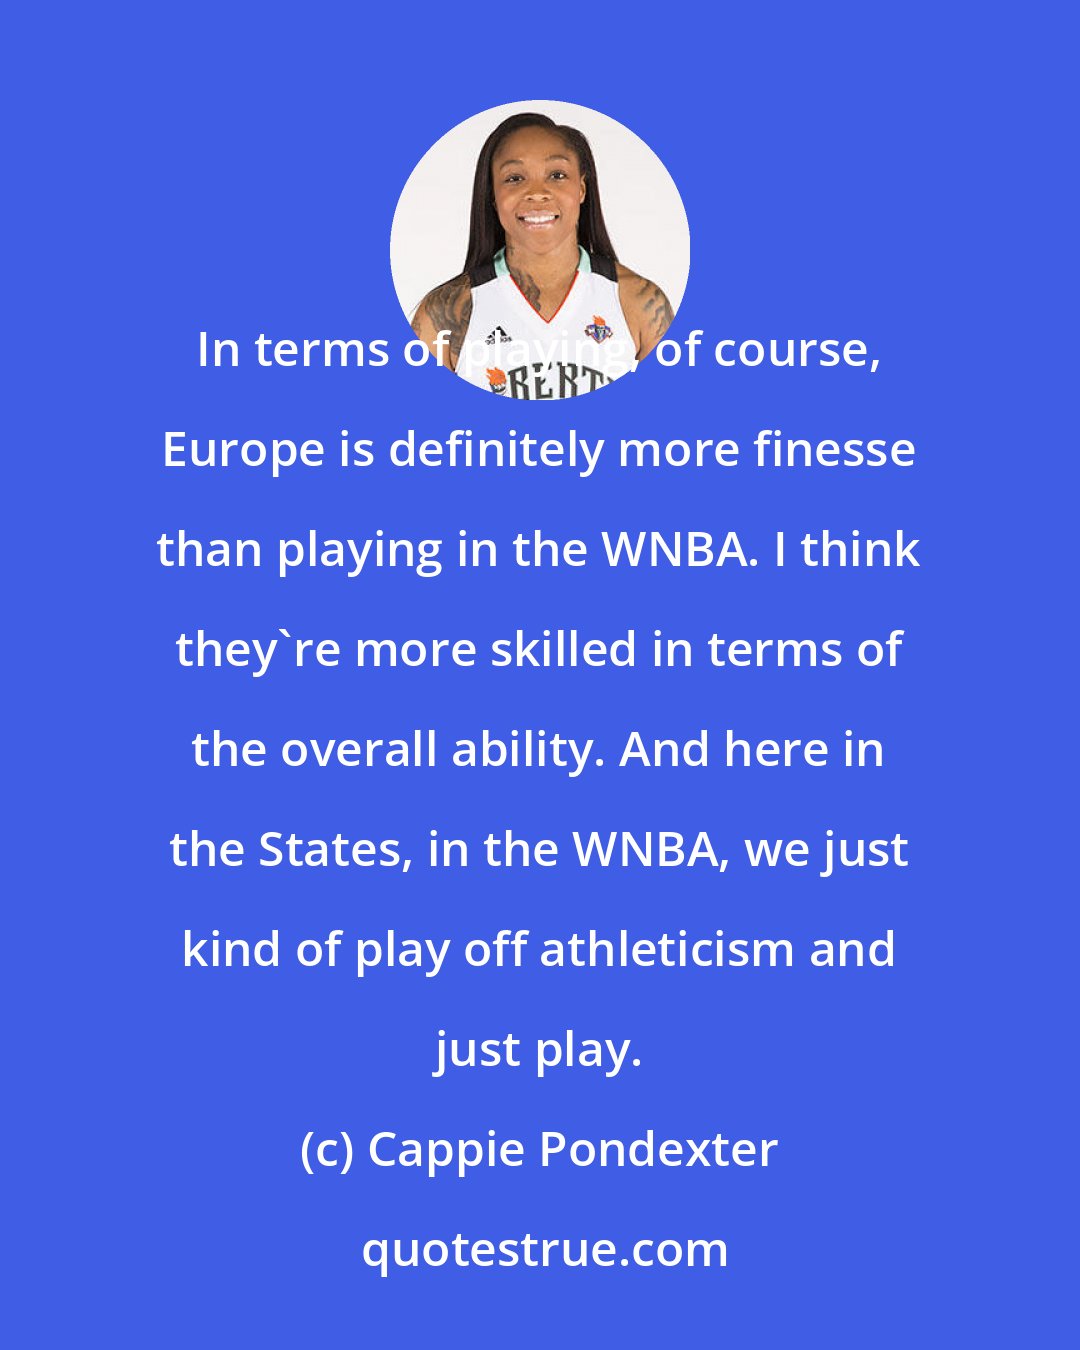 Cappie Pondexter: In terms of playing, of course, Europe is definitely more finesse than playing in the WNBA. I think they're more skilled in terms of the overall ability. And here in the States, in the WNBA, we just kind of play off athleticism and just play.